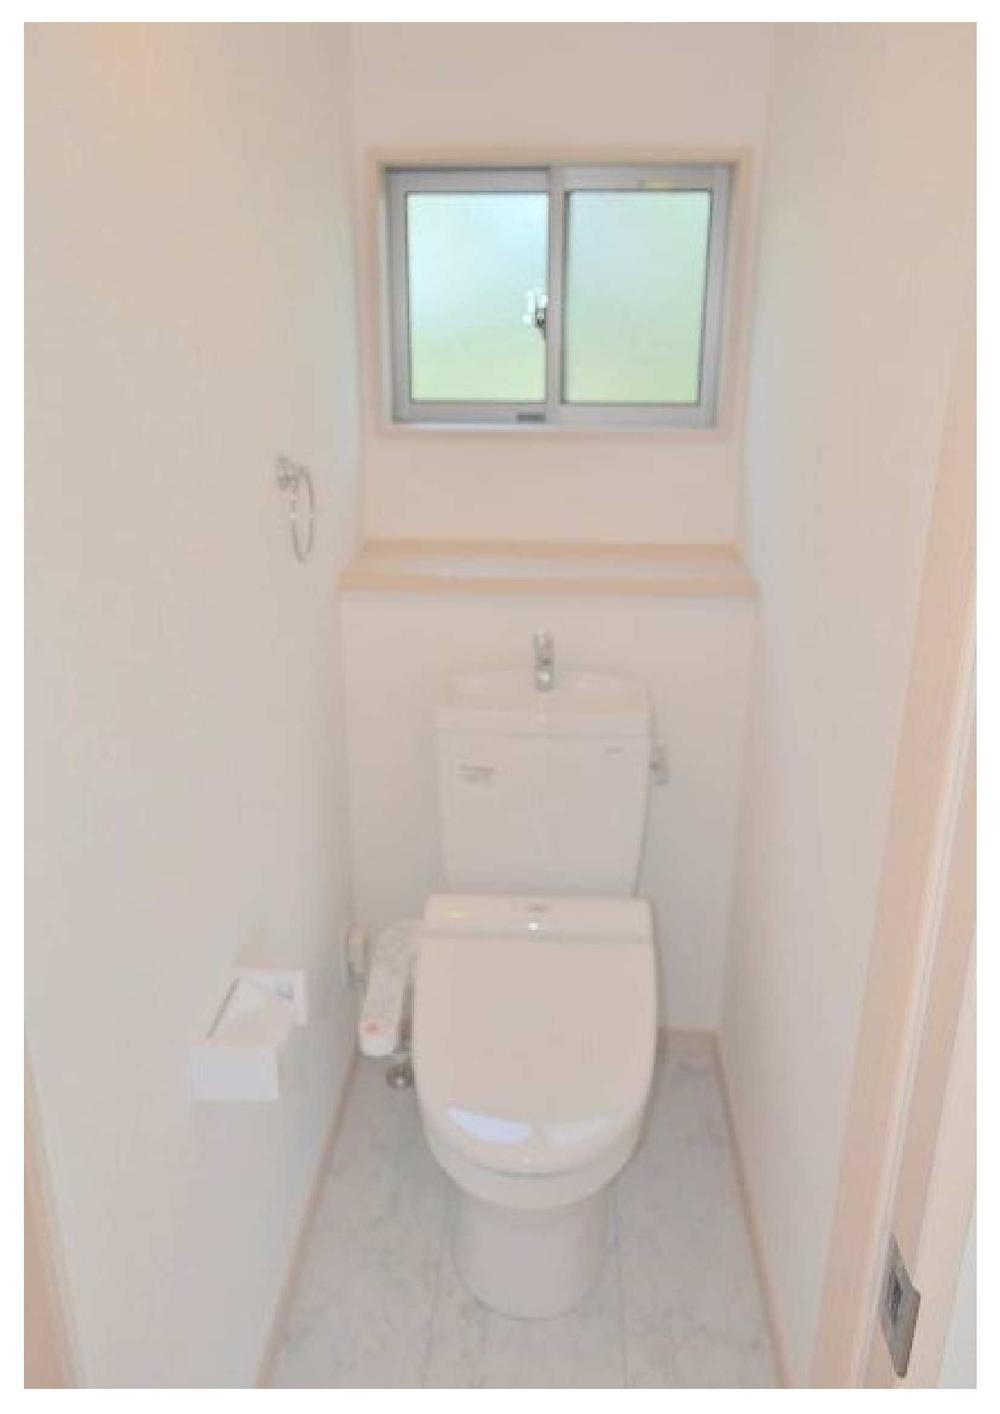 Toilet. Same specifications High-function toilet